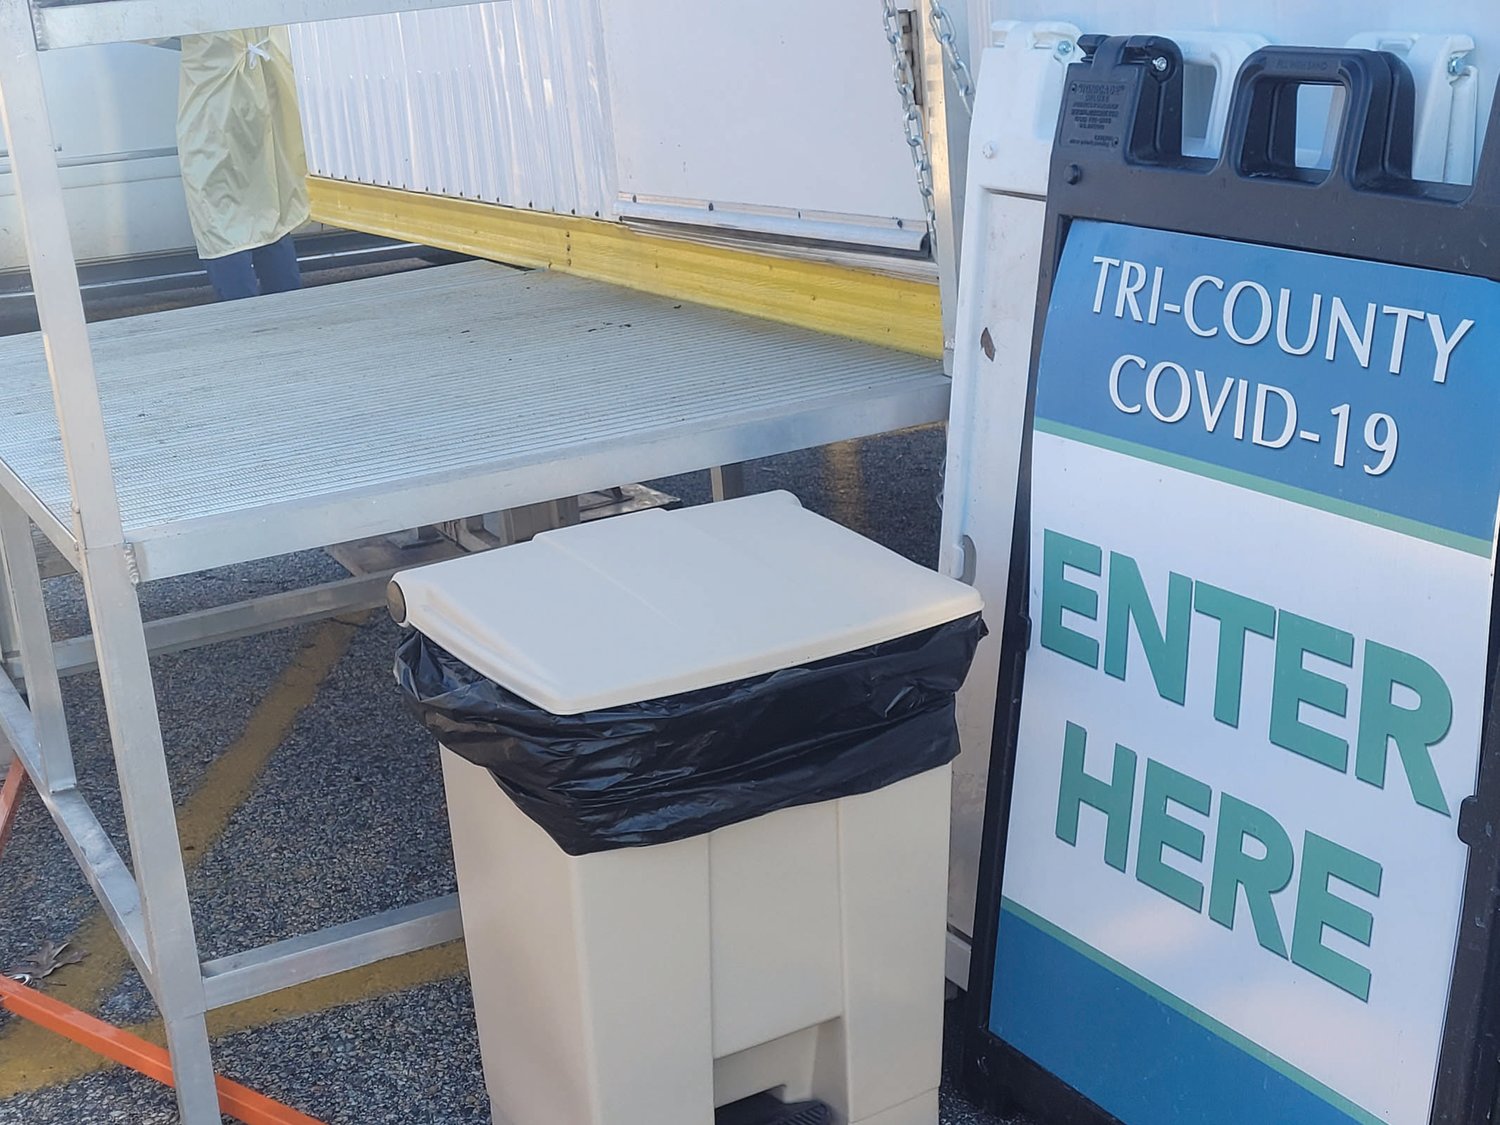 FREE TESTS: Tri-County Community Action Agency will staff the testing trailer in the high school parking lot, Monday through Friday, 9-11 a.m. and 2-4 p.m. Those who would like an appointment at the free test trailer need to call 401-519-1940.